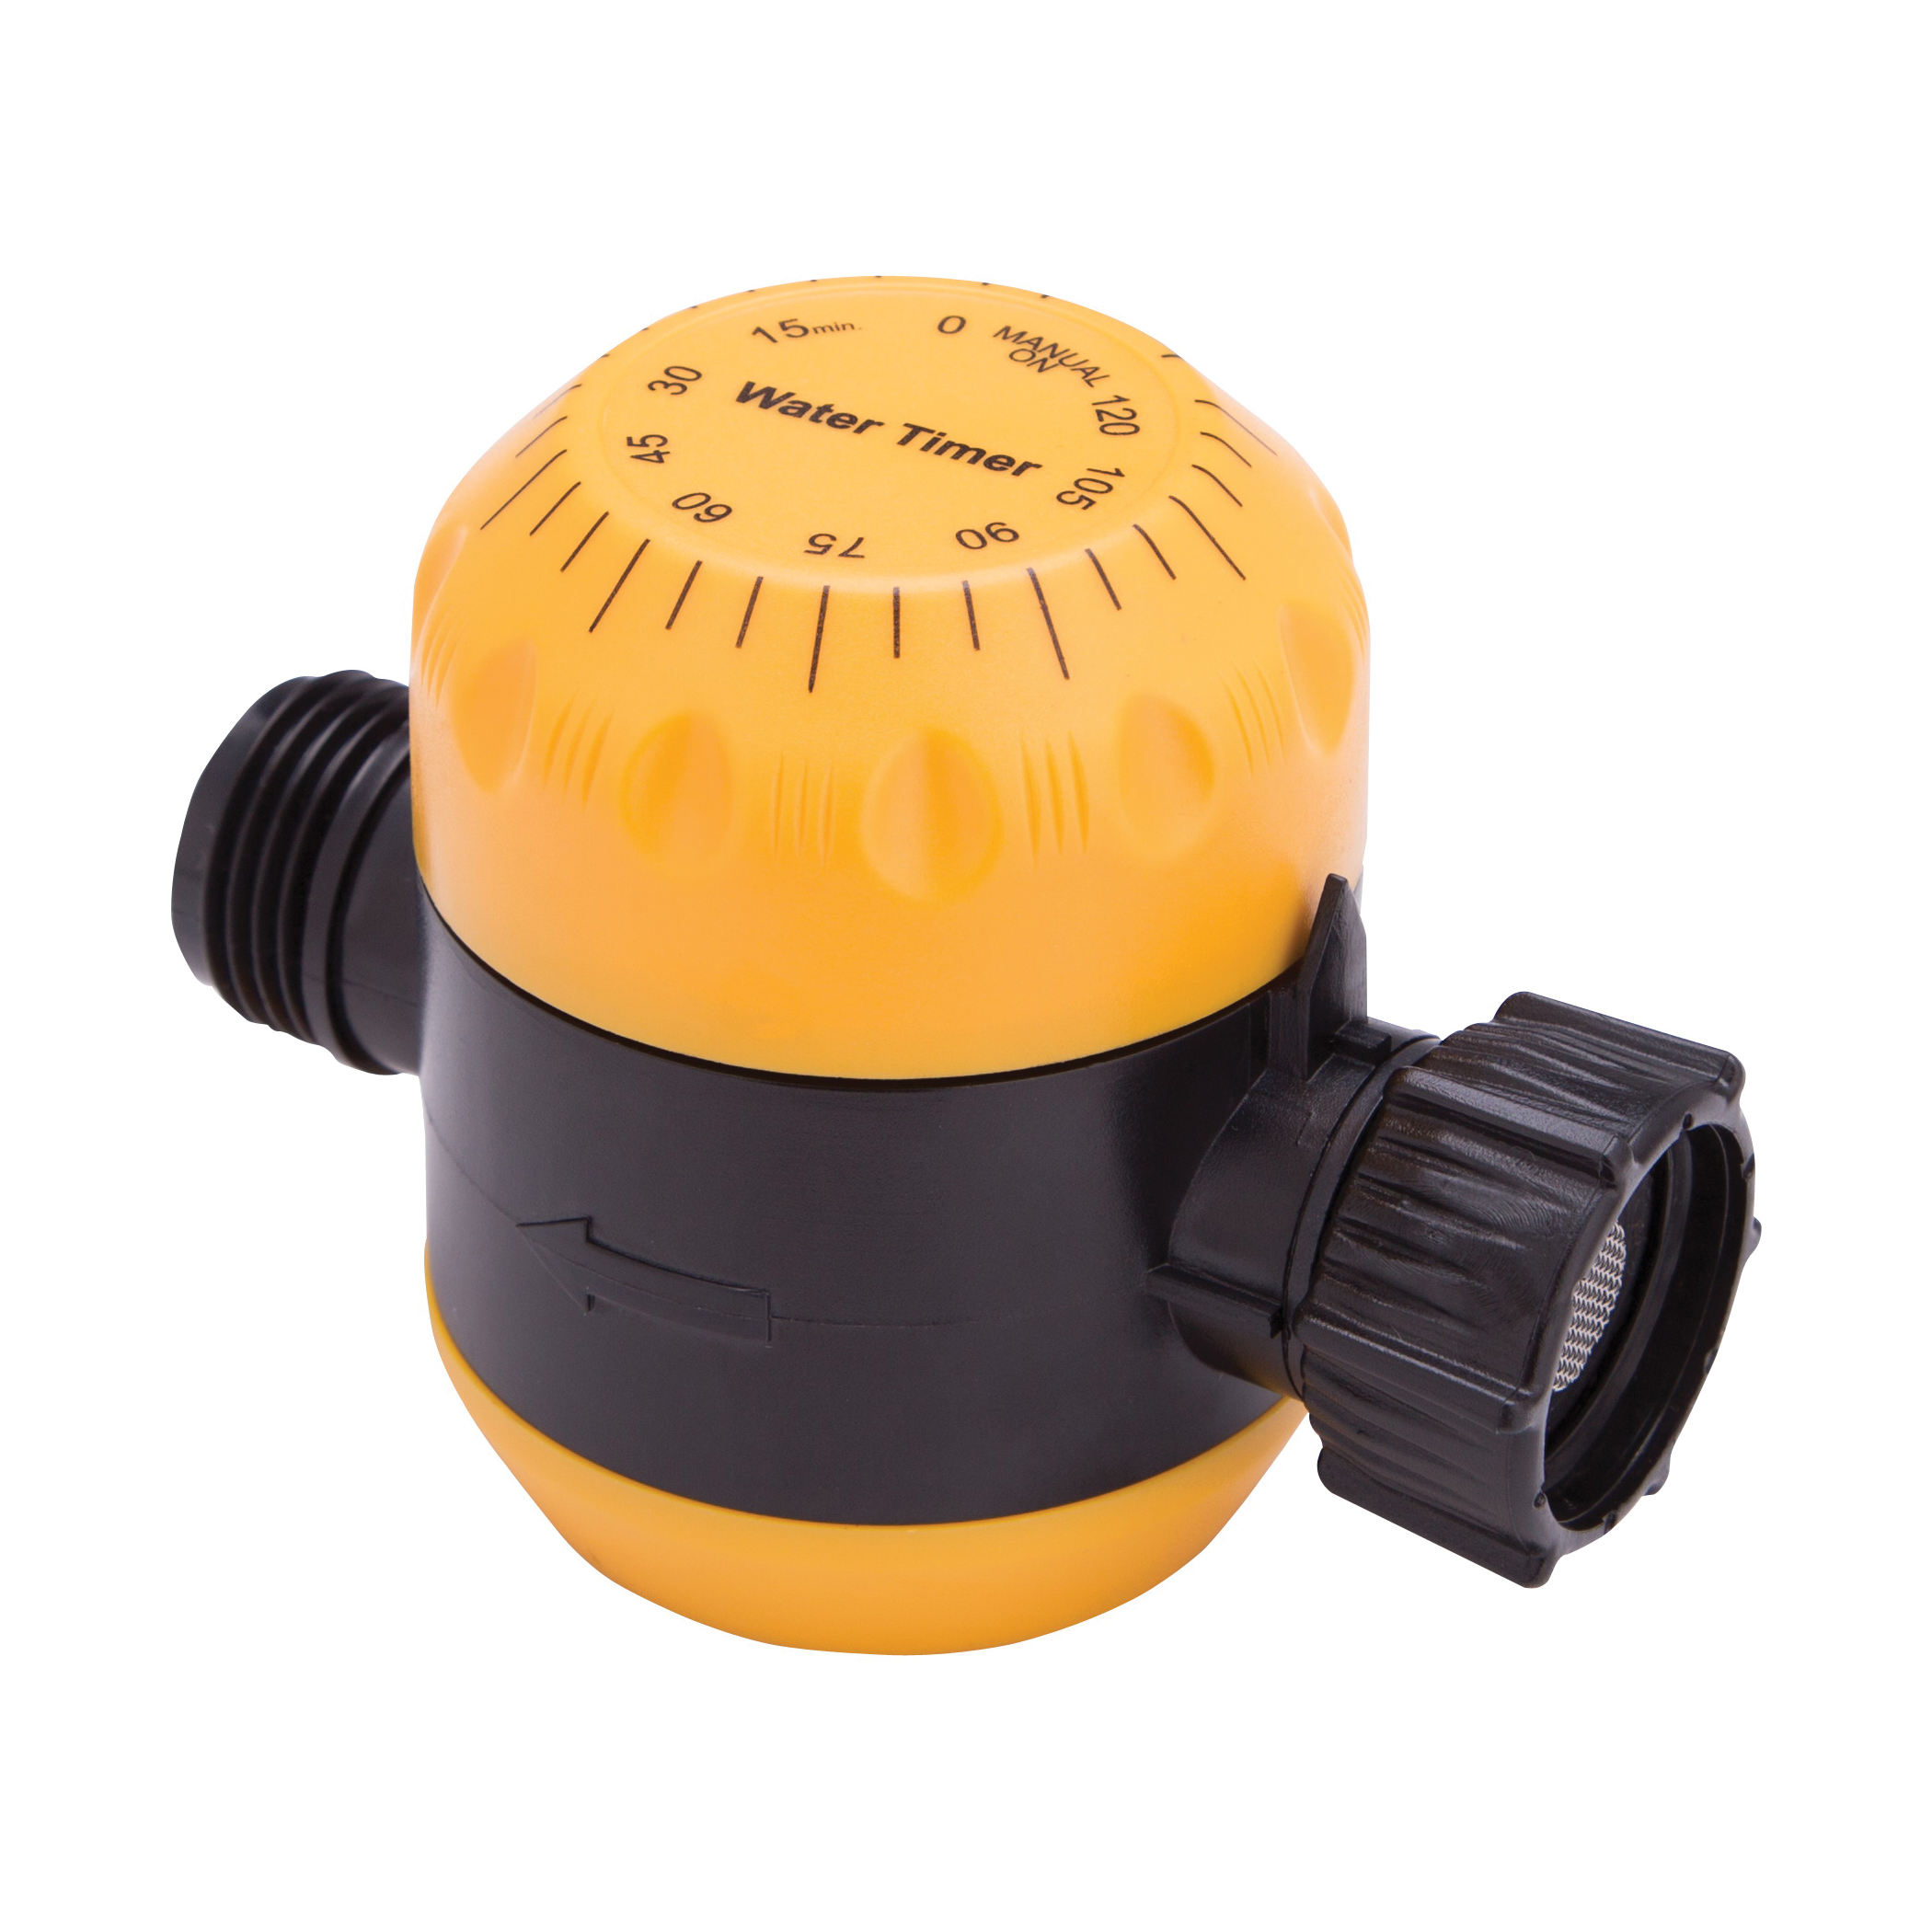 Landscapers Select GS5613L Watering Timer, 3/4 in Connection, Male/Female, Plastic